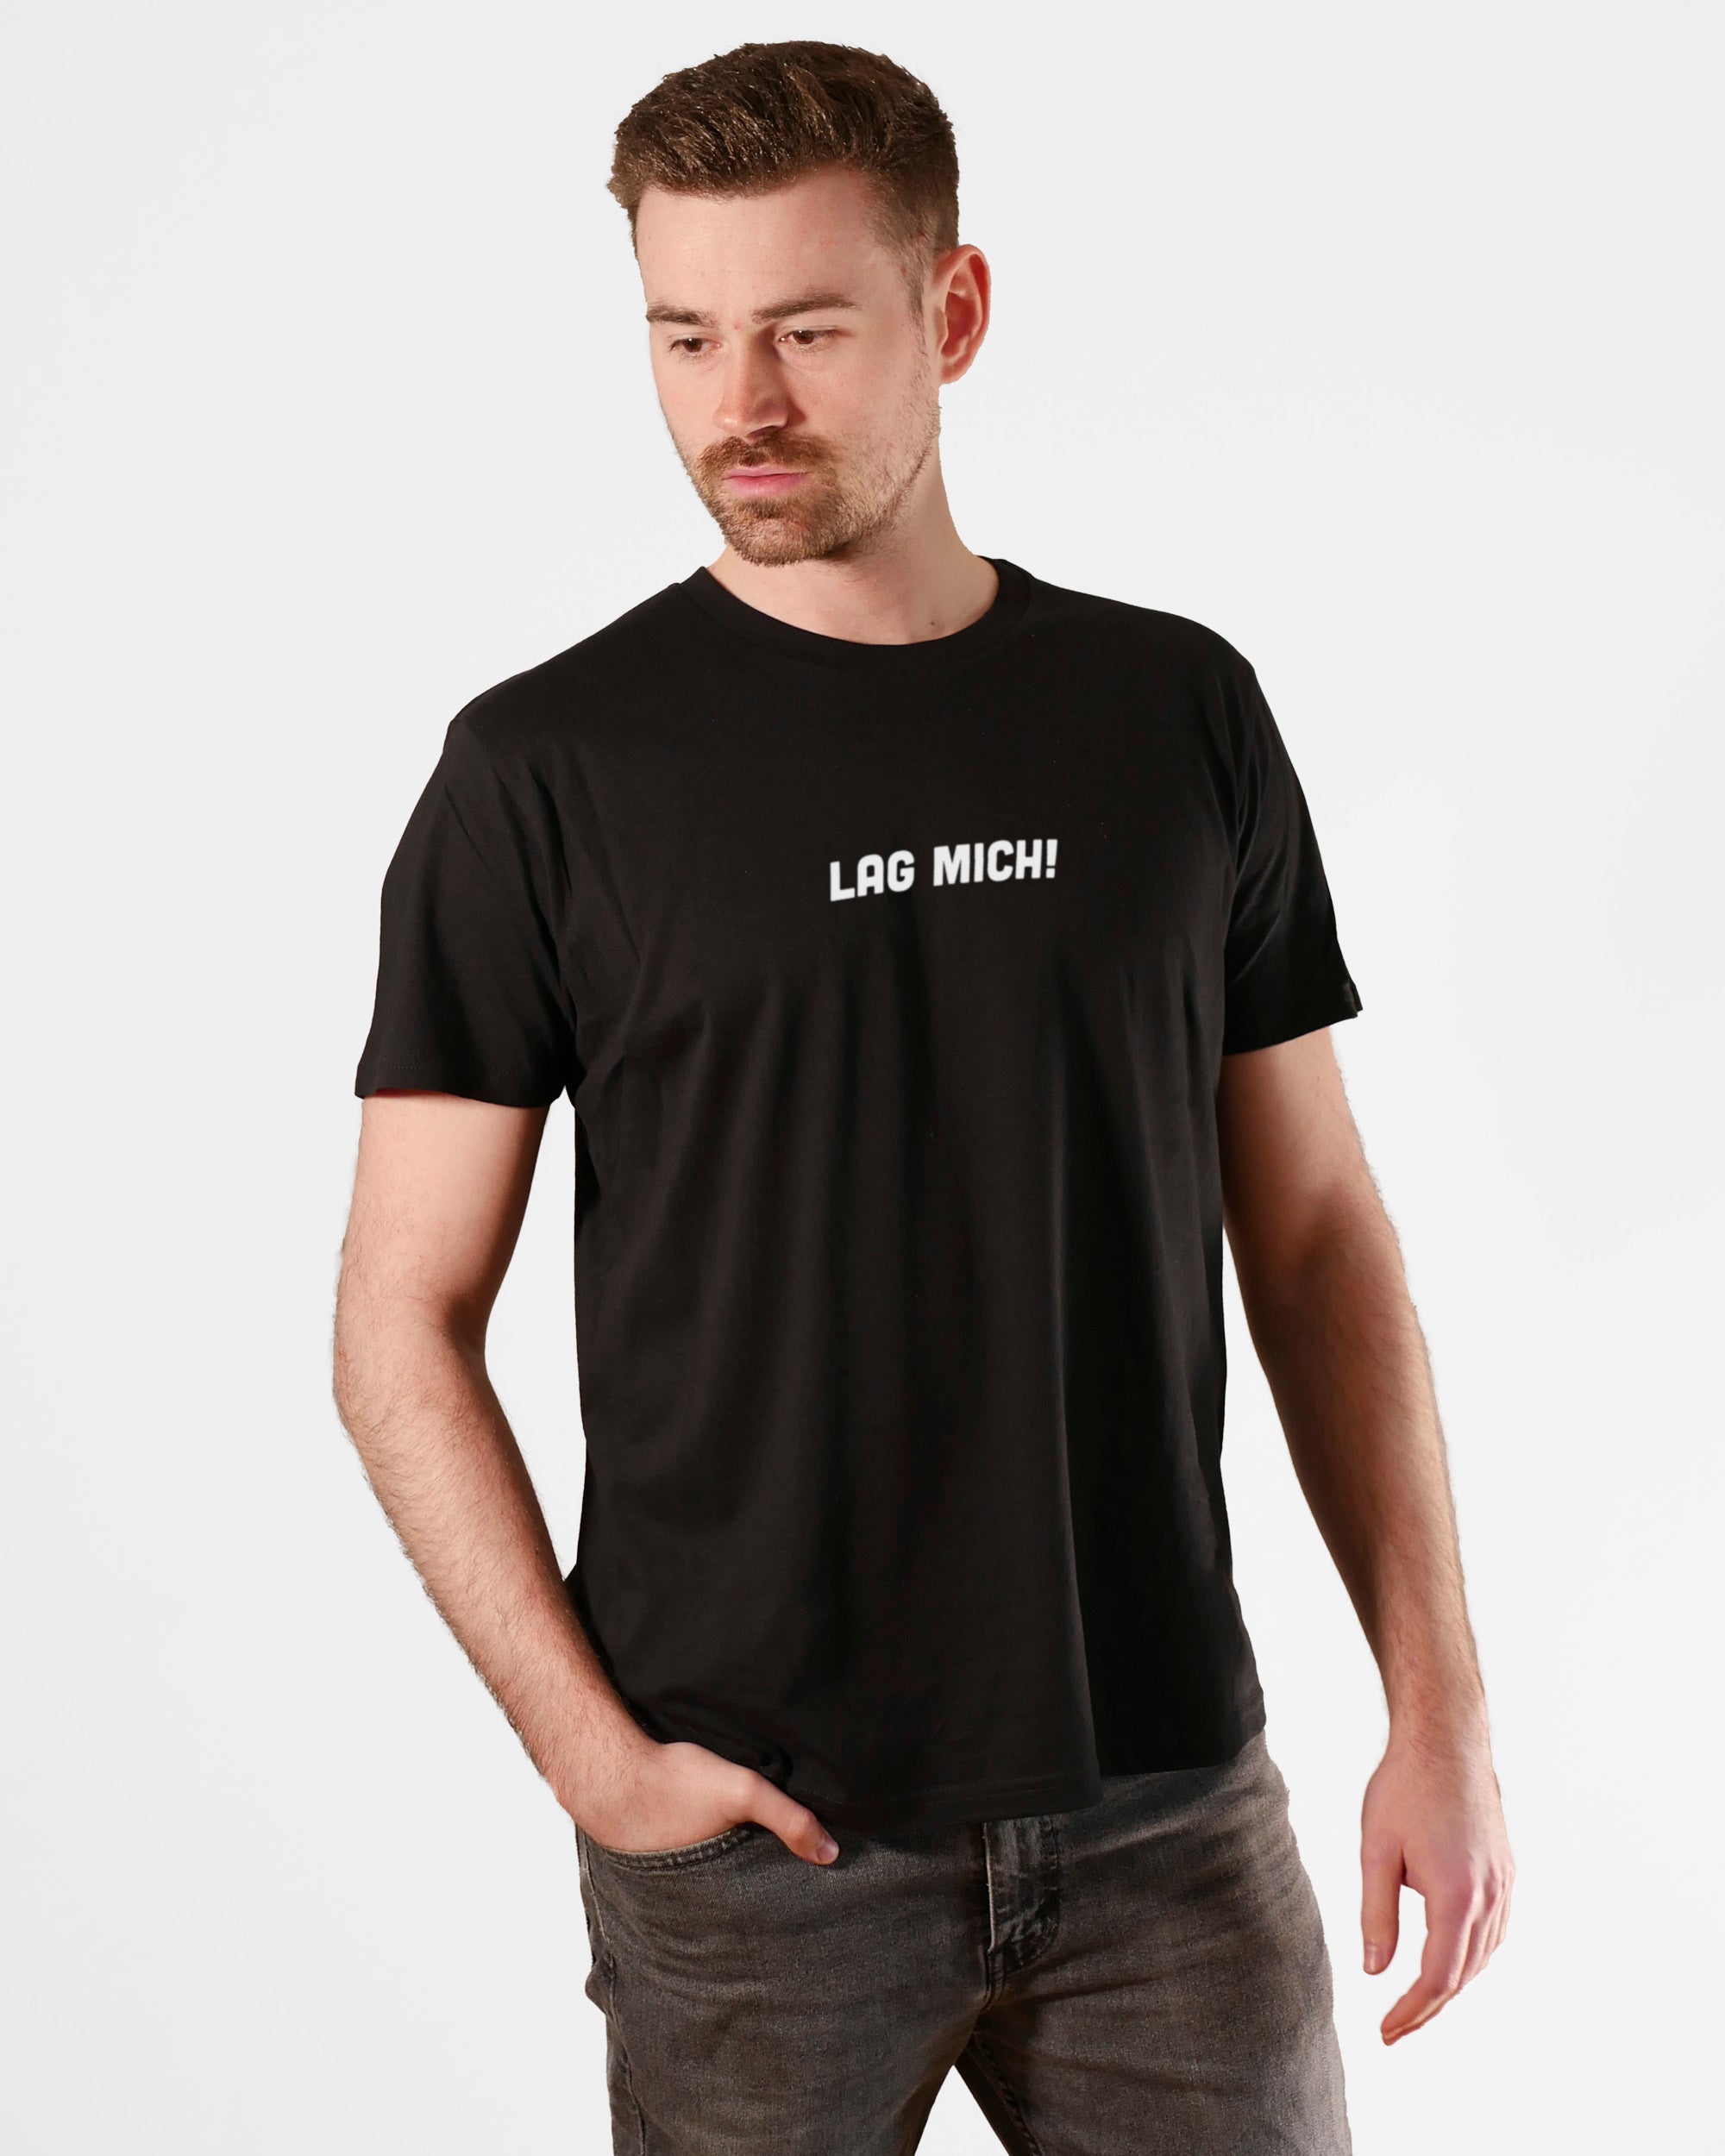 Lag mich! | 3-Style T-Shirt